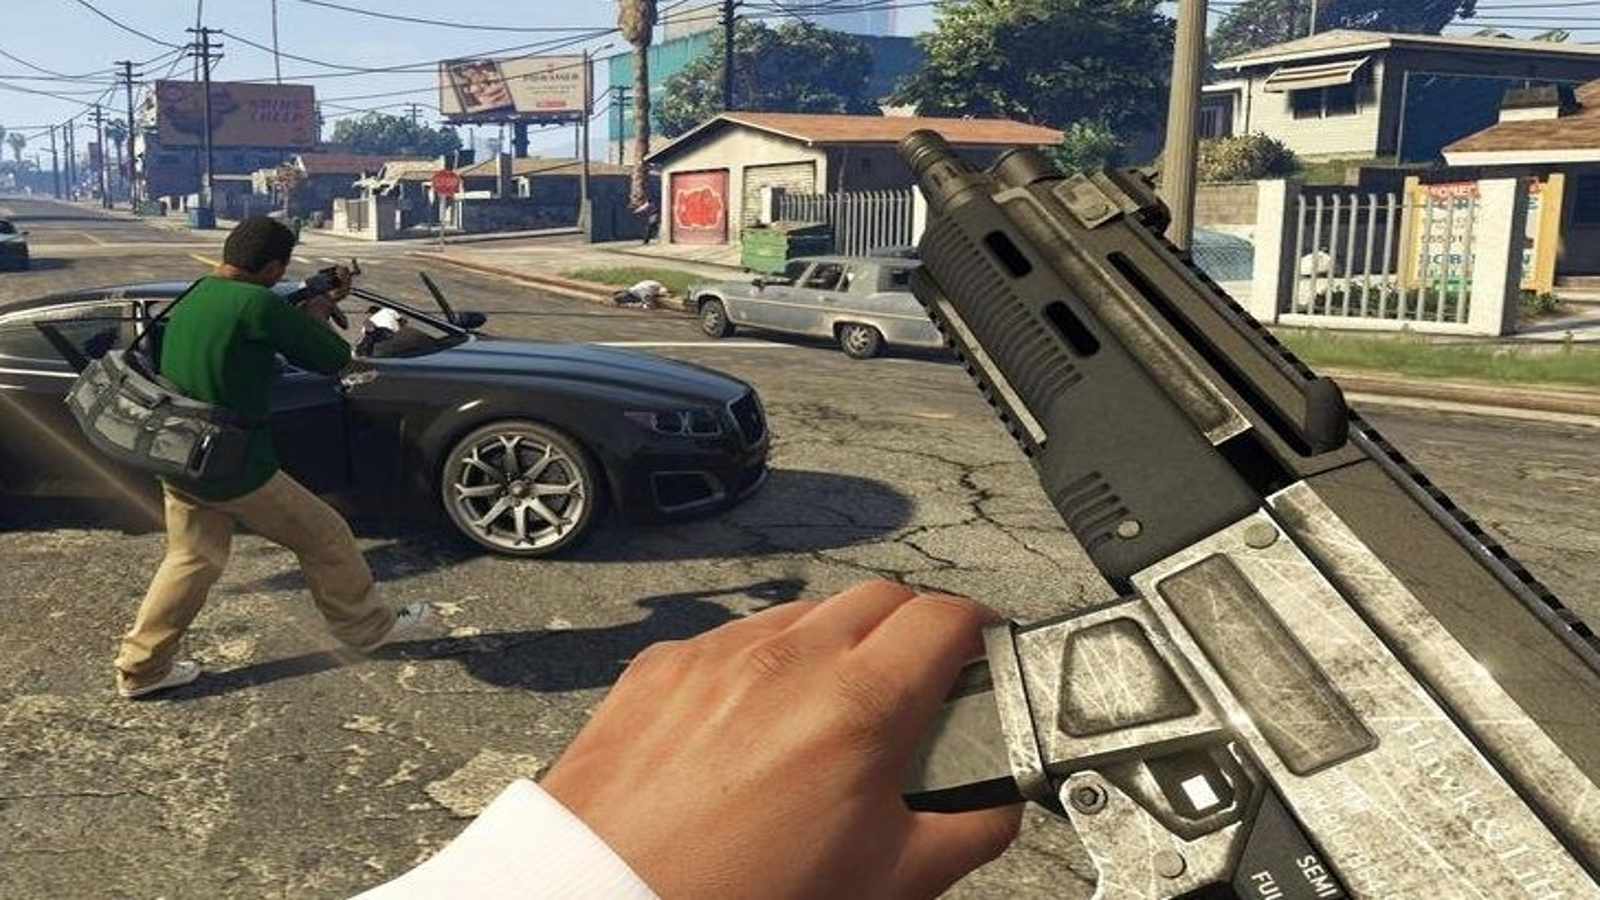 Grand Theft Auto 5 on Xbox 360 Gets First-Person View Mod, Videos